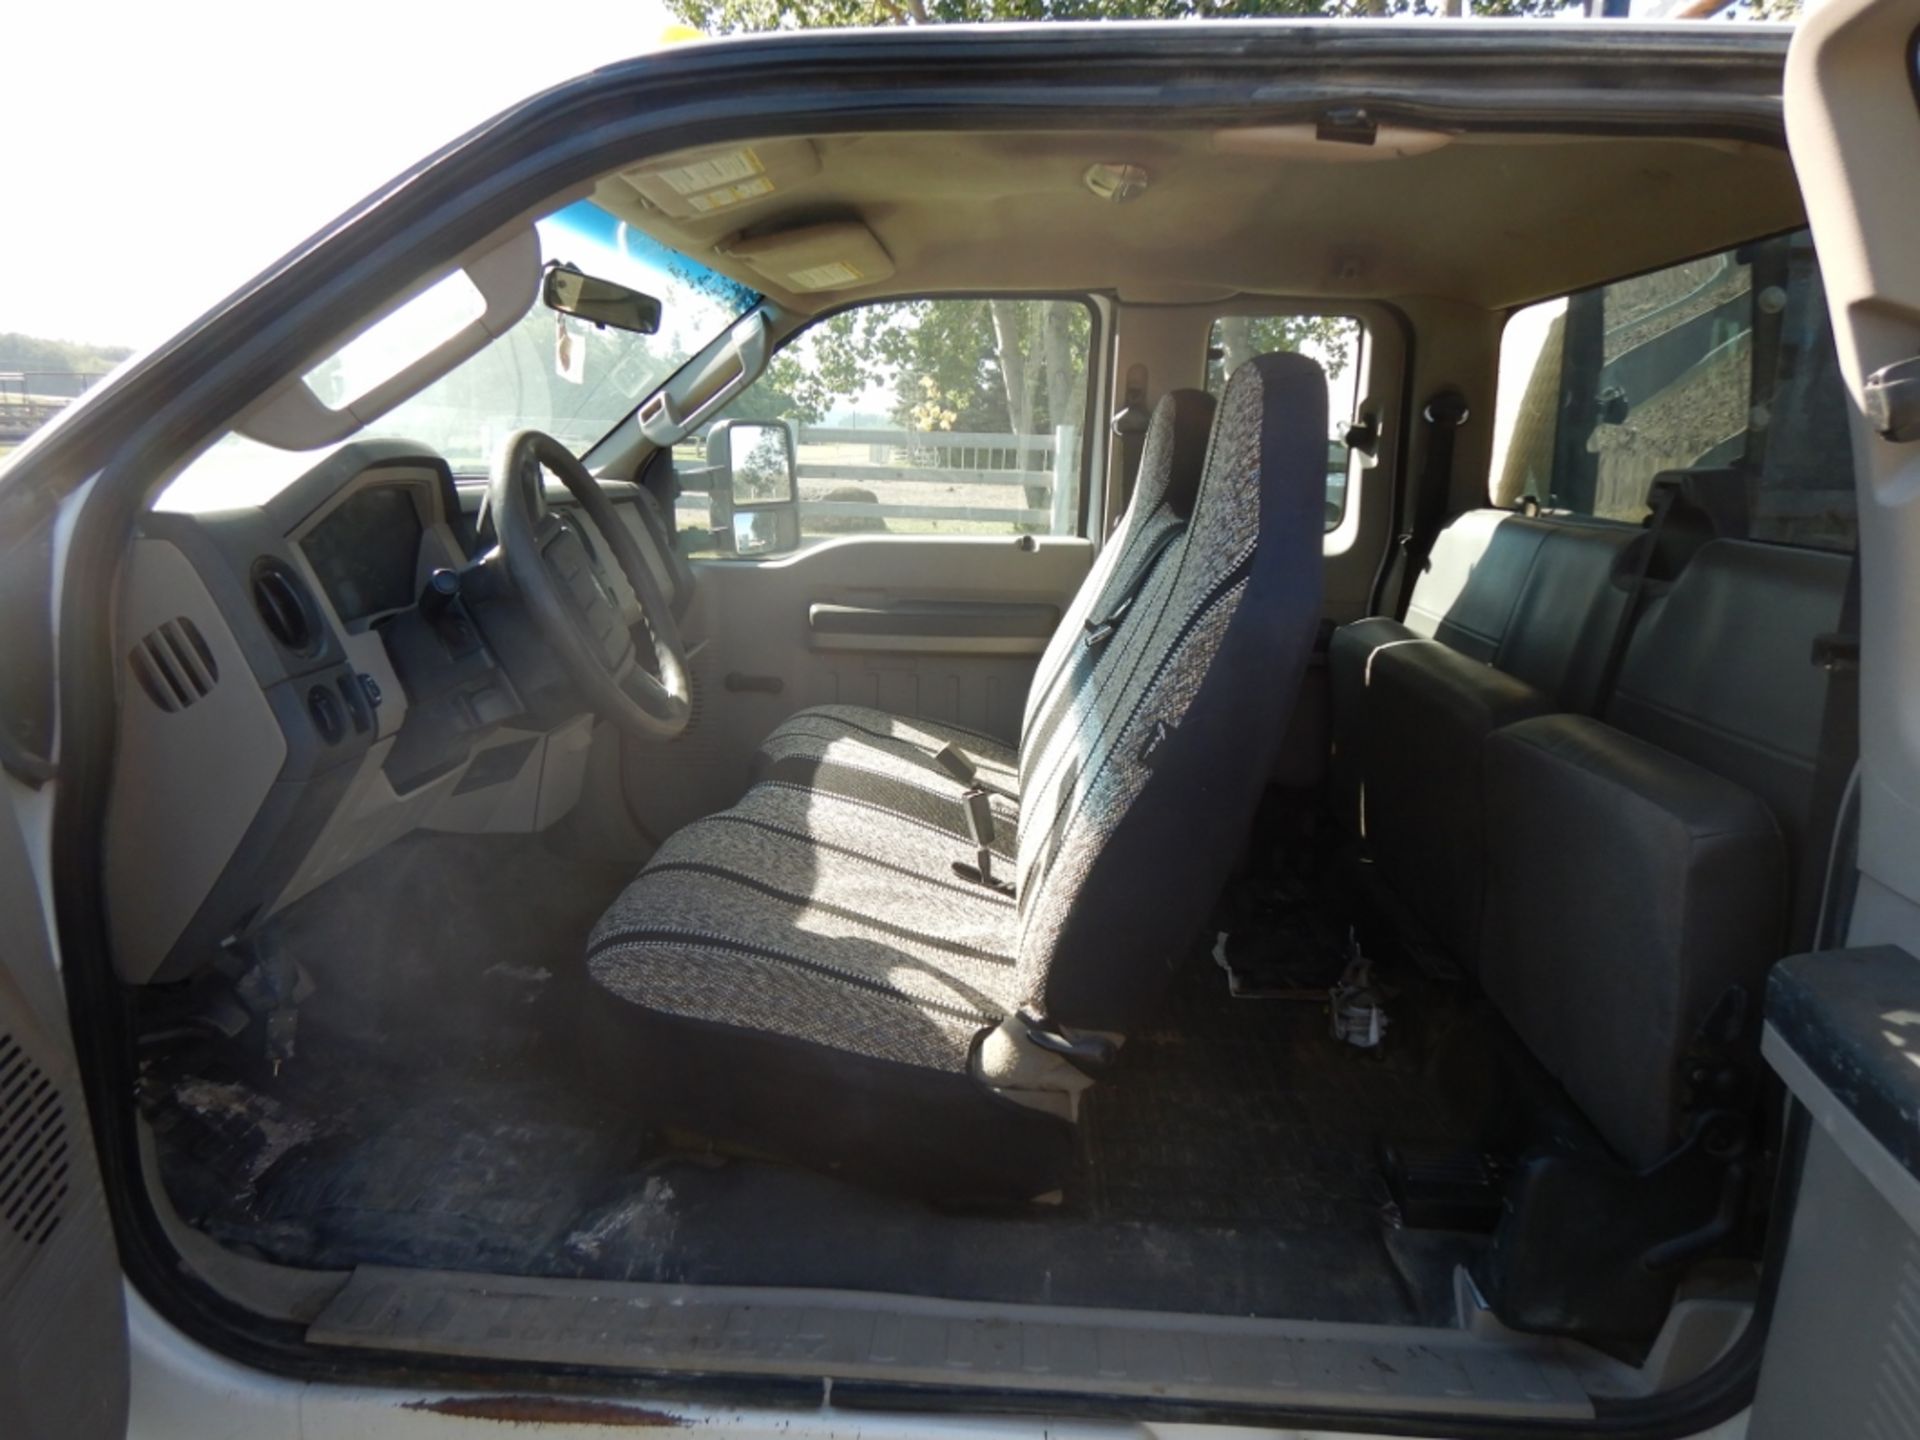 2007 TOYOTA TUNDRA 4X4 P/U W/ 5.7L V8, A/T, QUAD CAB, CLOTH INT., 6FT BOX, 508,273 KM'S SHOWING - Image 9 of 21